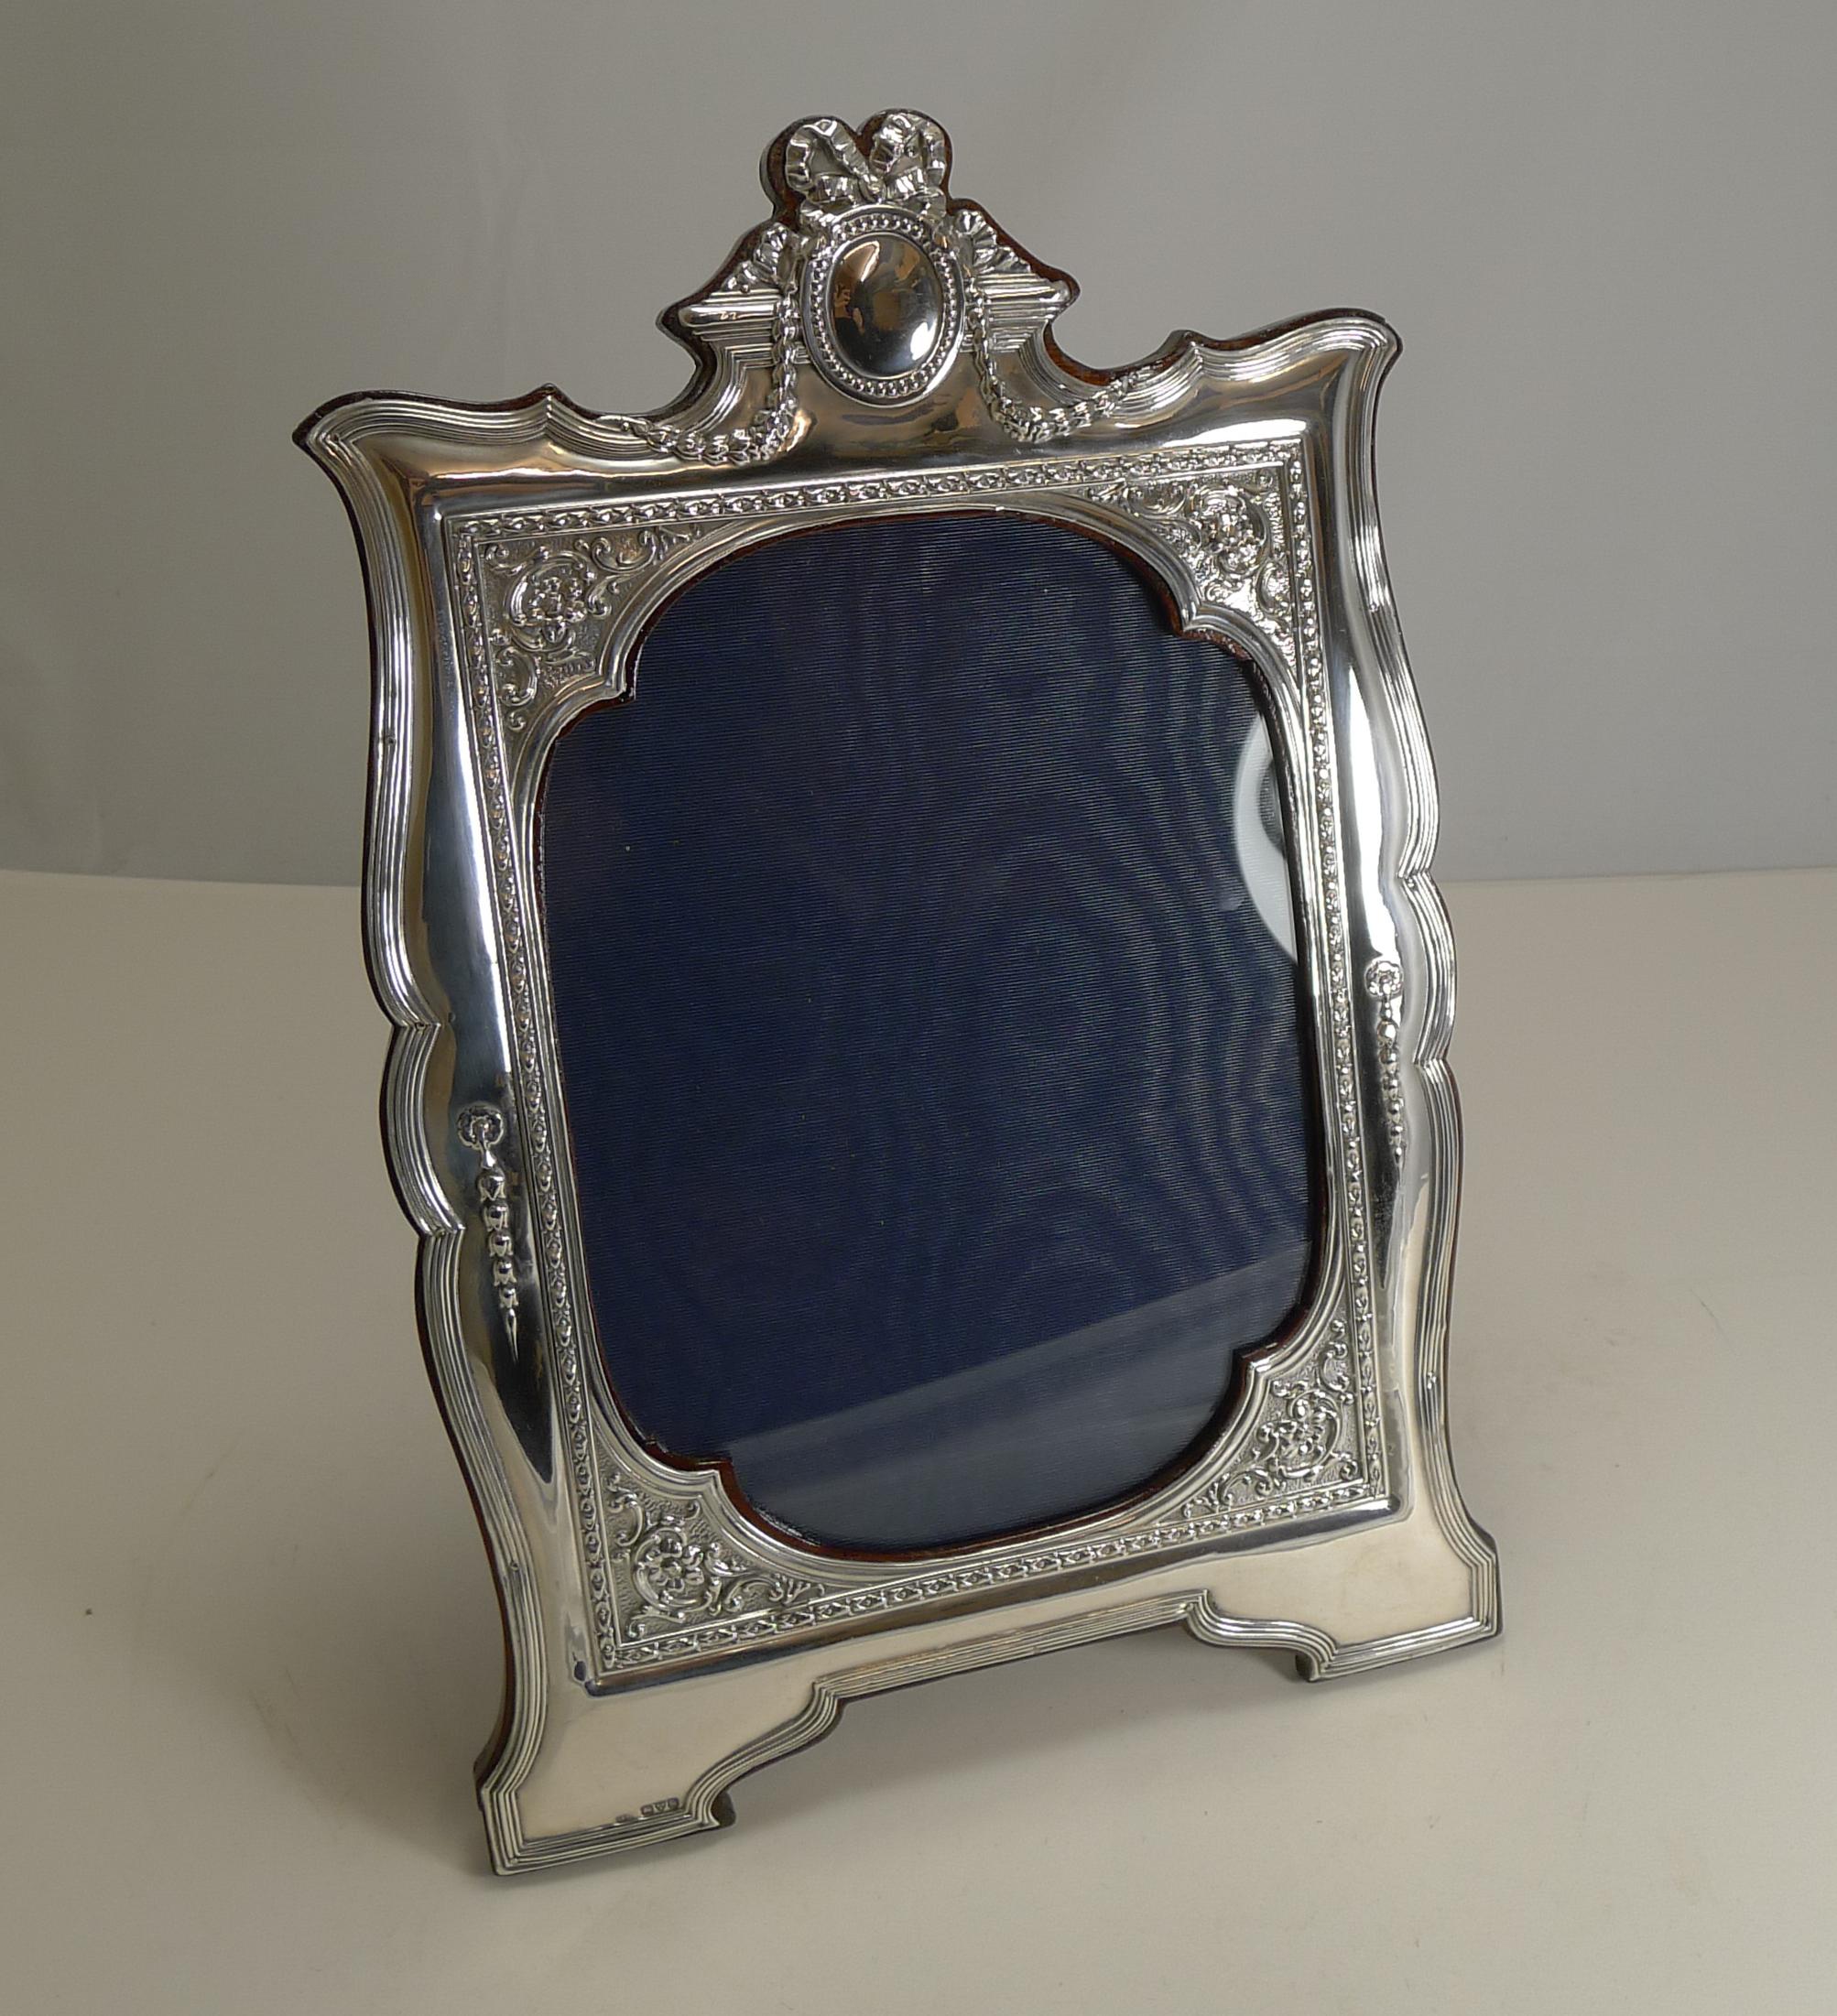 A wonderful large and impressive decorative photograph frame made from English sterling silver with a mahogany backing incorporating a folding easel stand.

The shaped frame is beautifully decorated with a lovely shaped glazed aperture. The silver